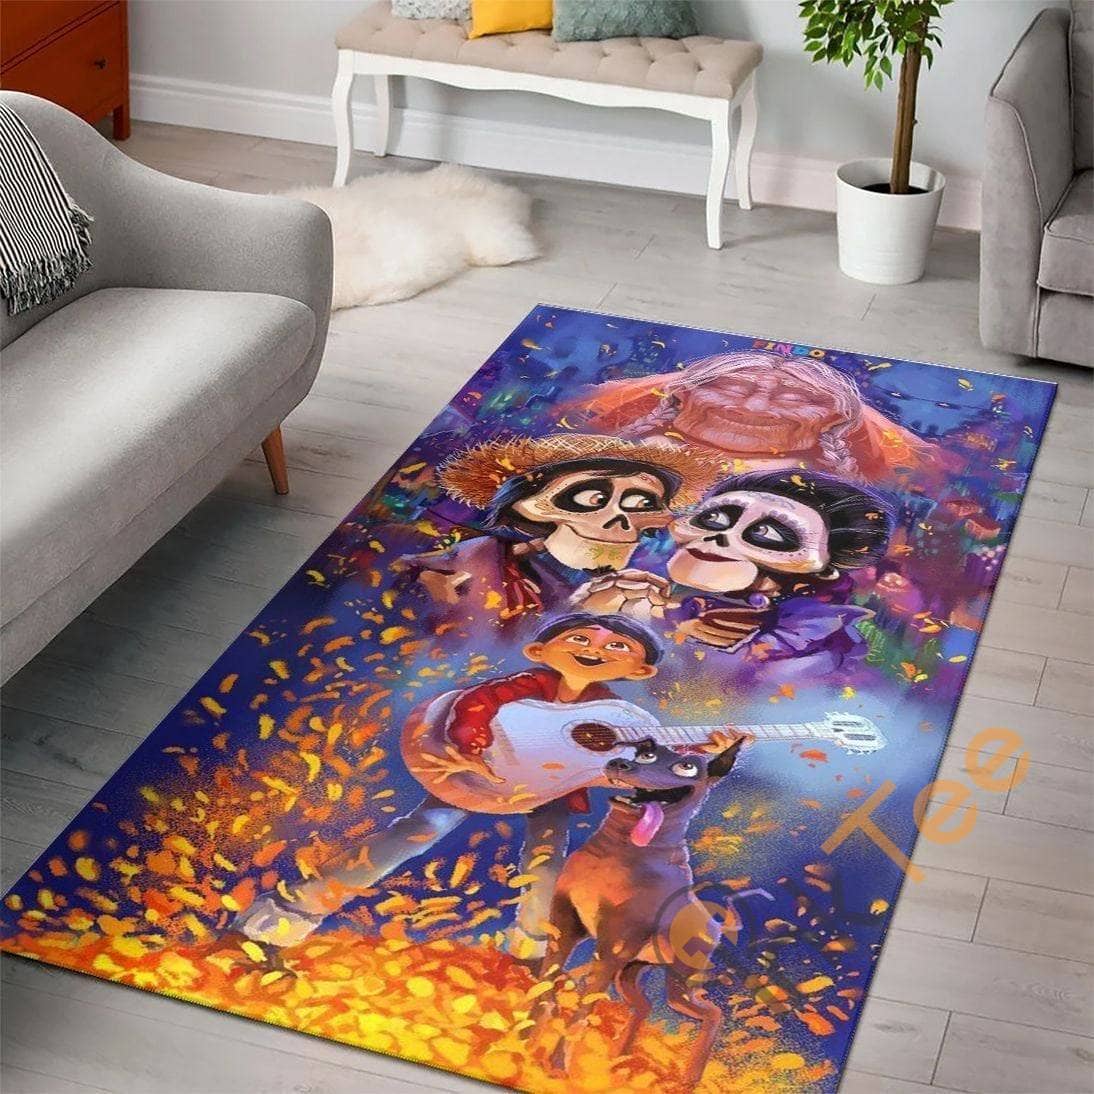 Coco Day Of The Dead Disney Movies Living Room Us Decor Floor Rug